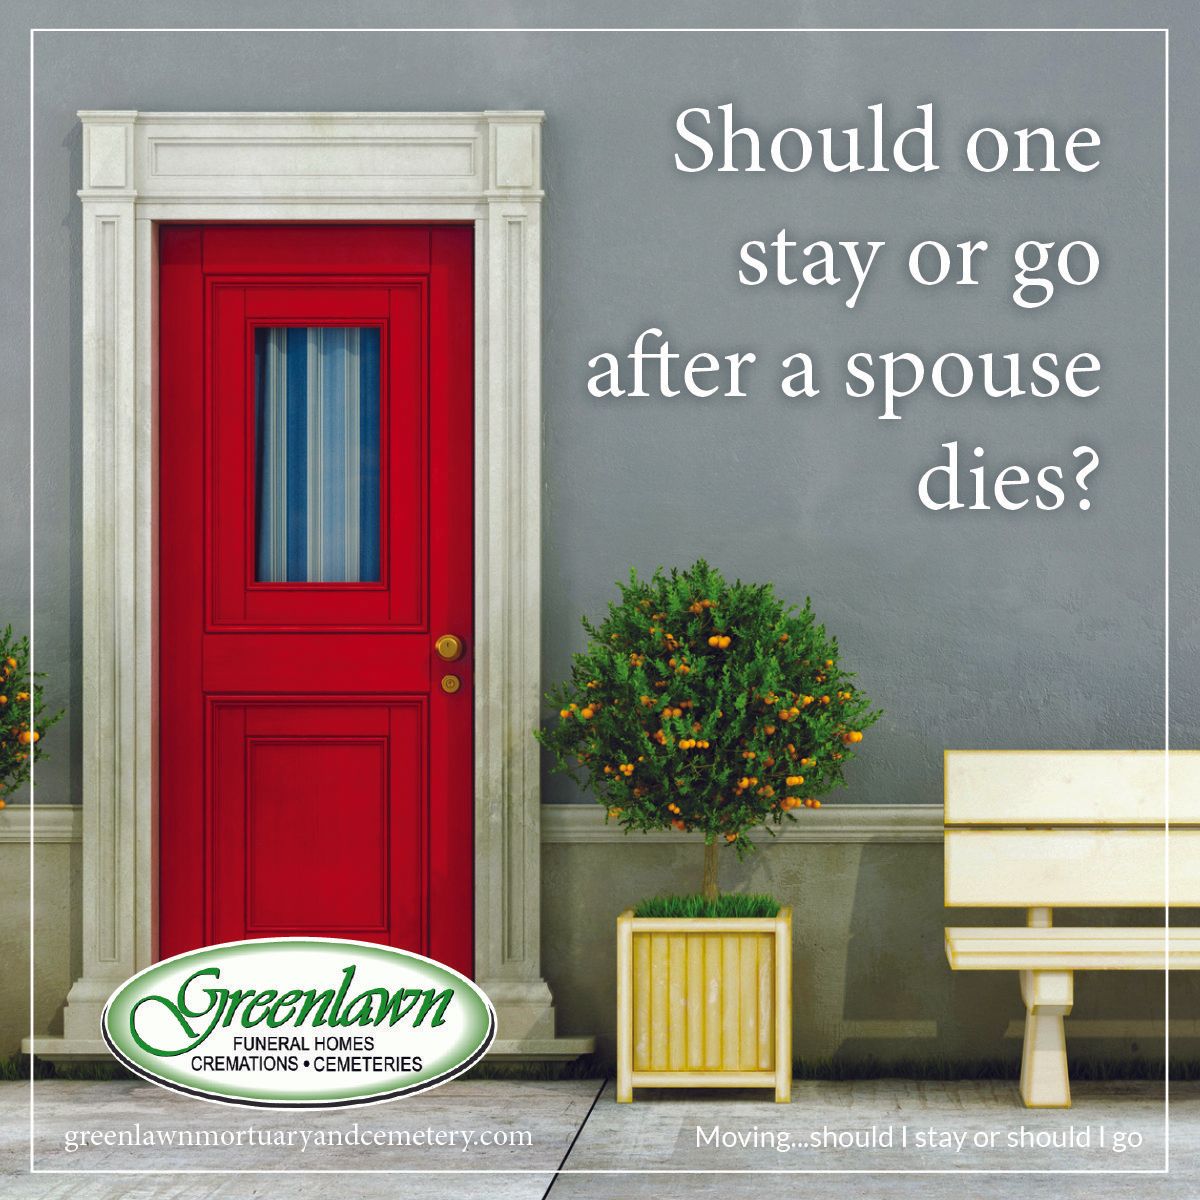 Moving after a spouse dies?